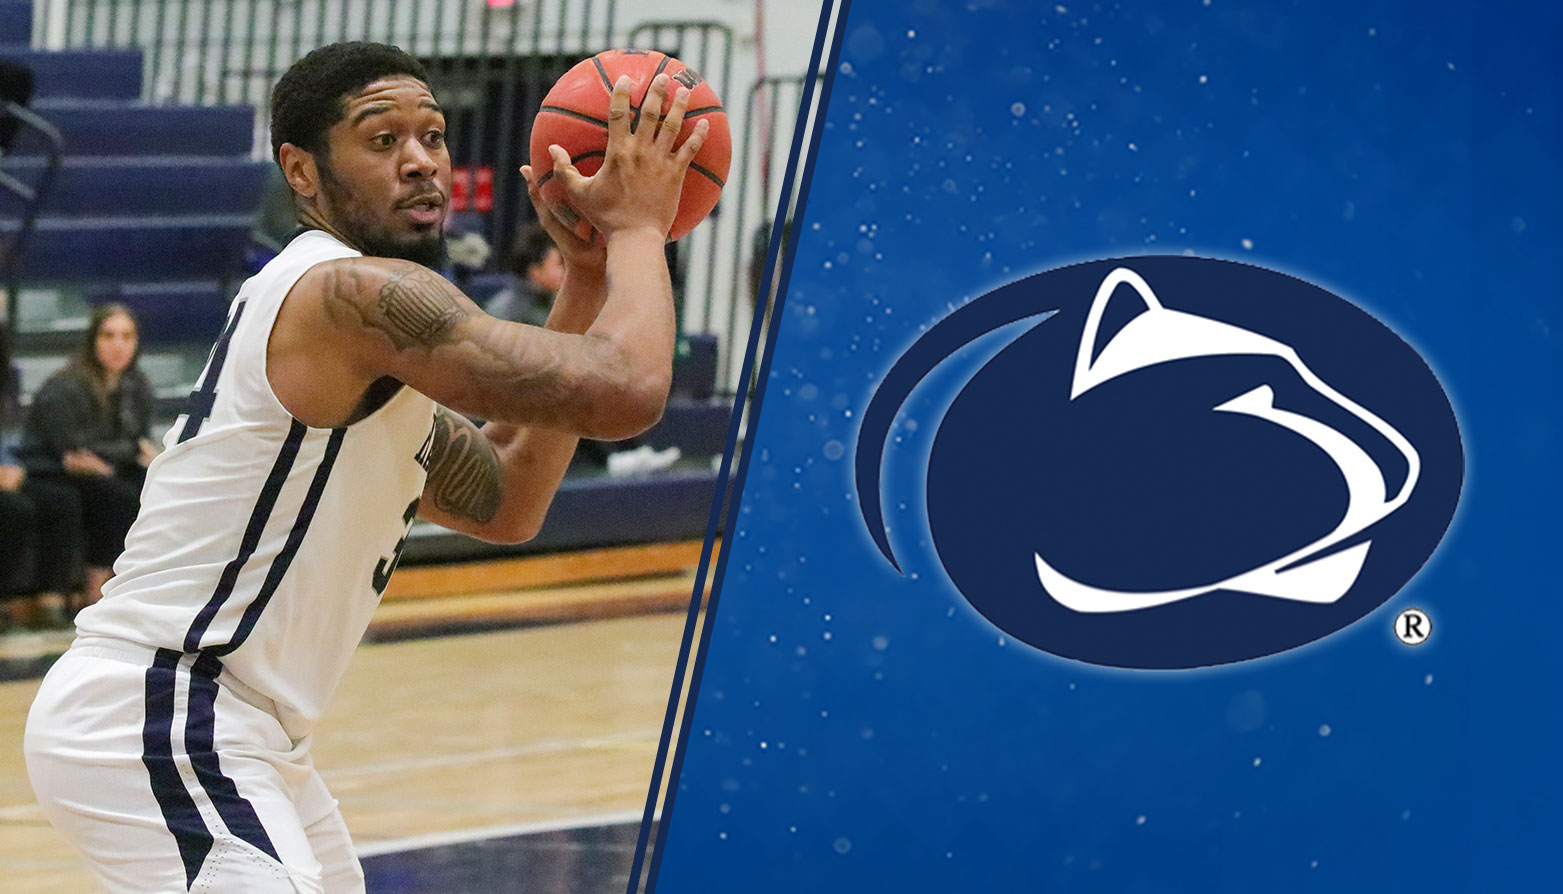 Penn State Harrisburg's Kahlil Williams Named CAC Men's Basketball Player of the Week